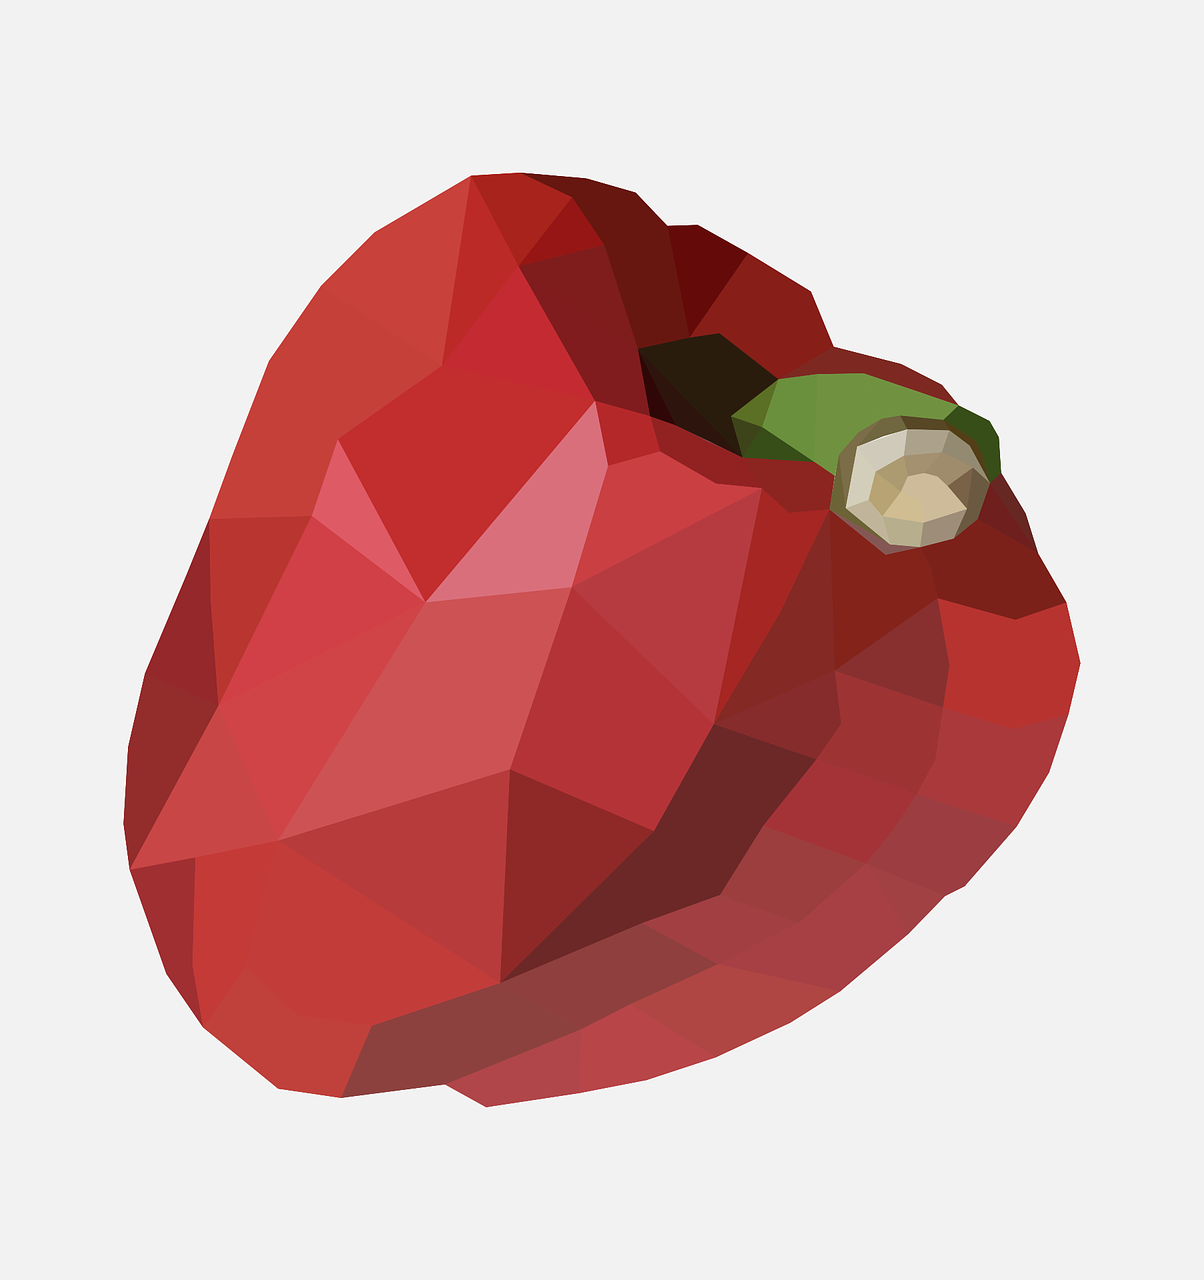 red pepper large red pepper photo illustration polygon free photo